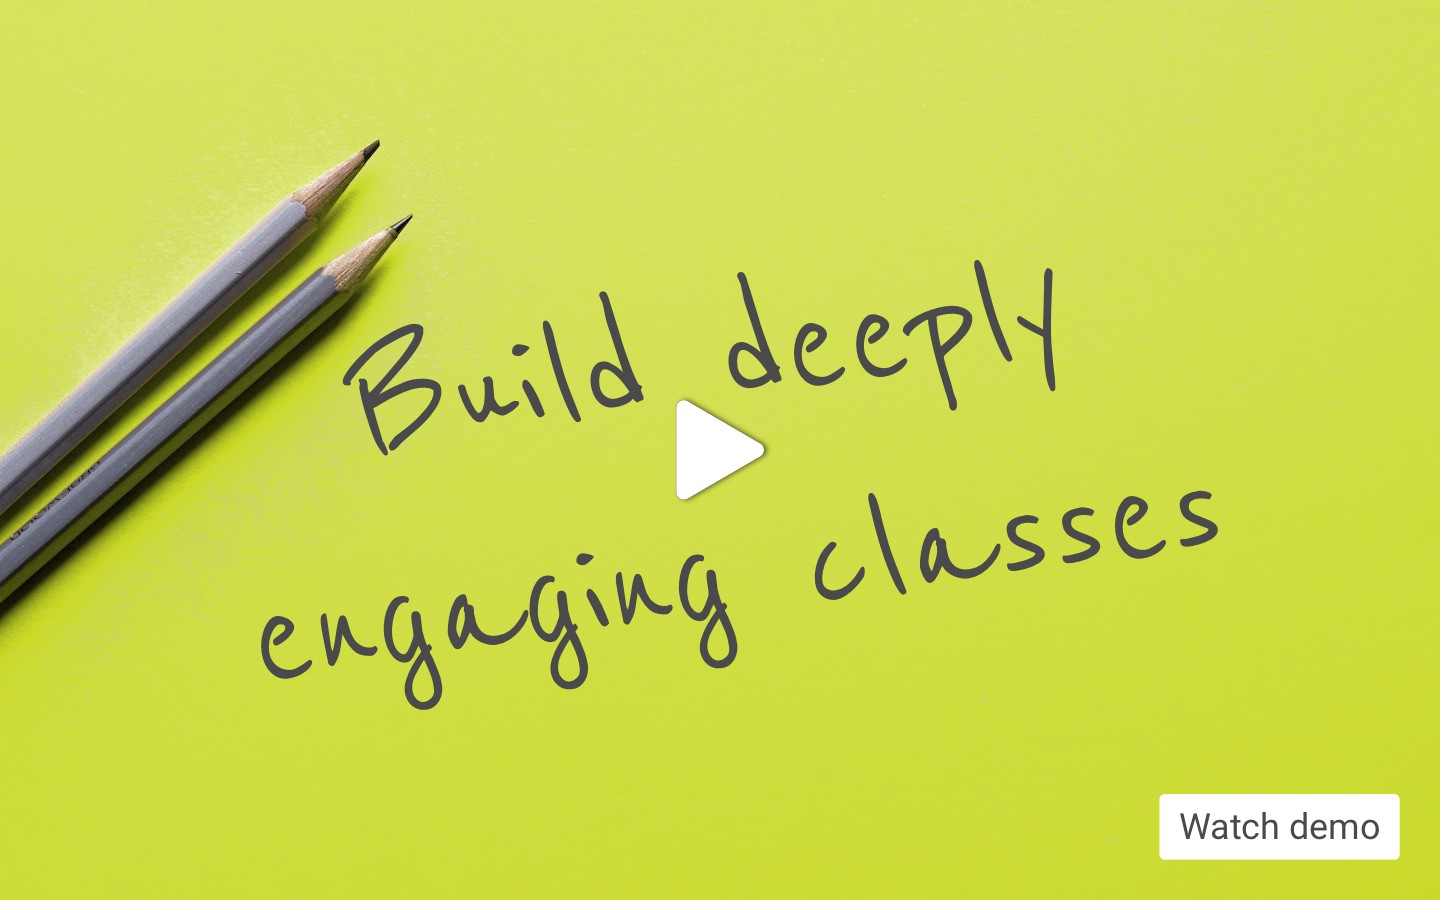 Build deeply engaging classes 